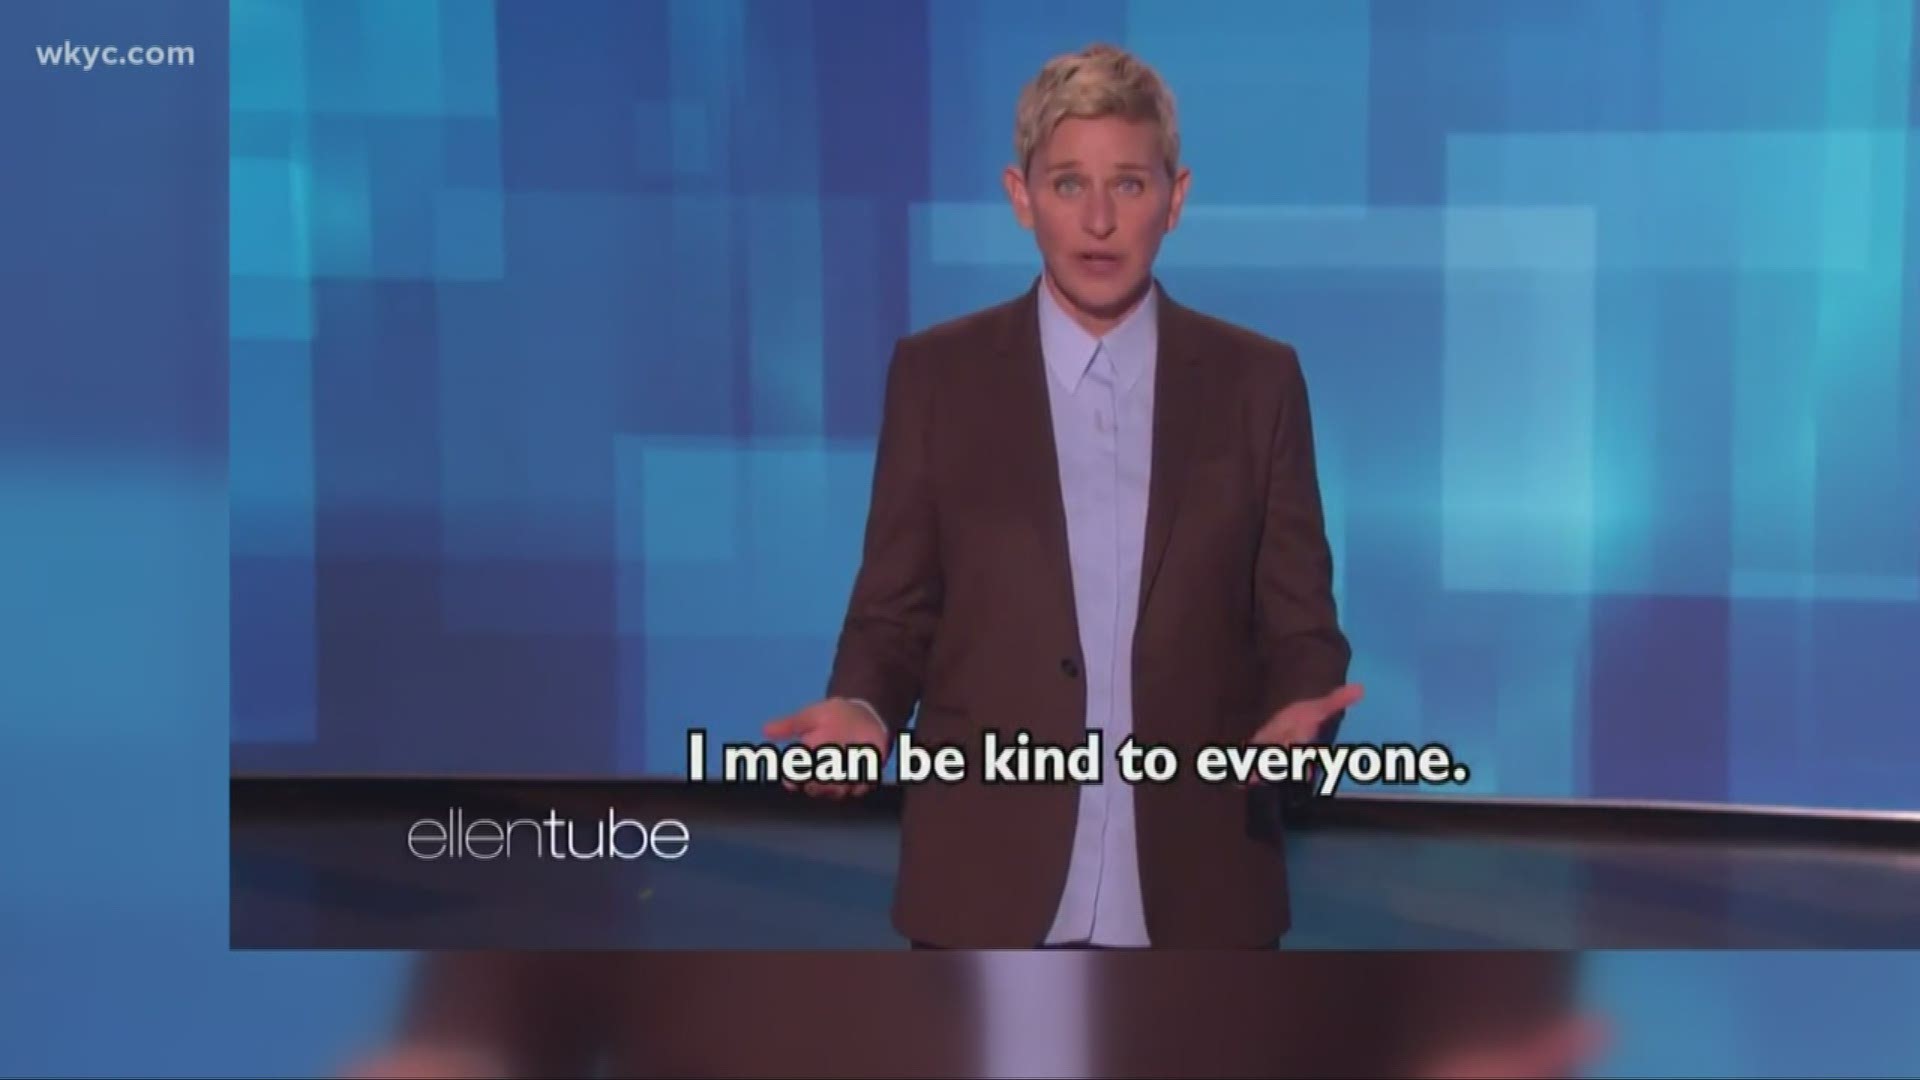 Ellen DeGeneres says that we need to be kind to everyone, even people we disagree with.